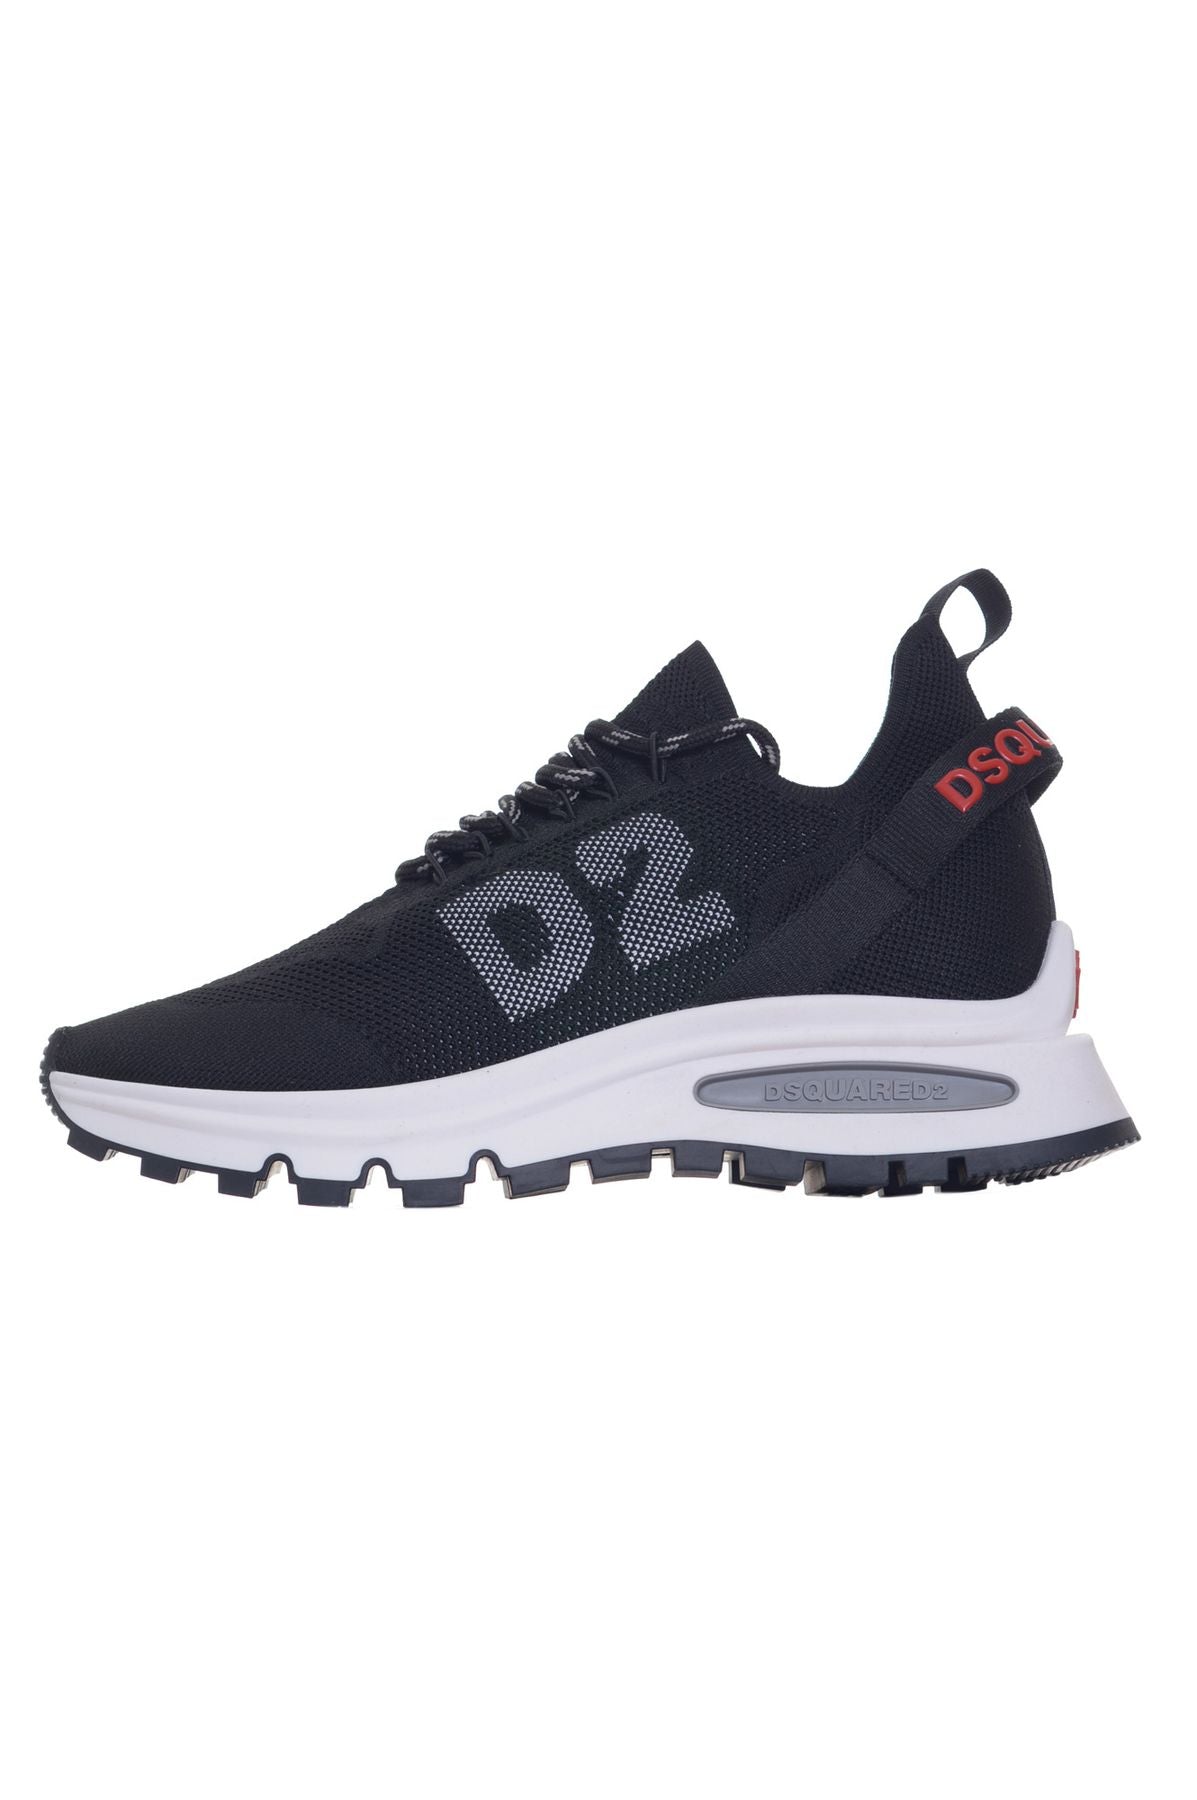 DSQUARED2 Spring/Summer Sneakers snm021159204353